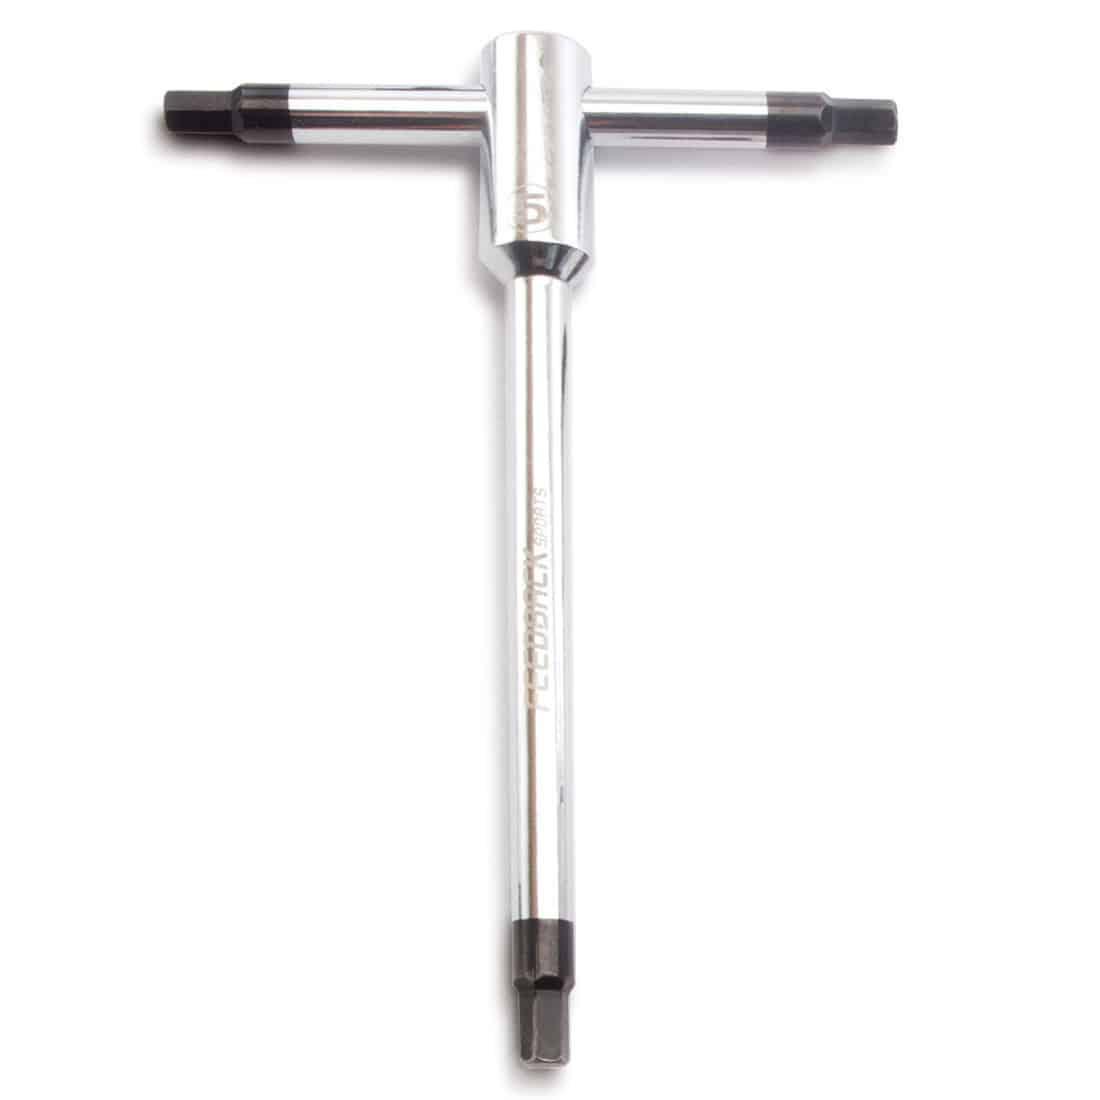 T-handle hex wrench on white background.